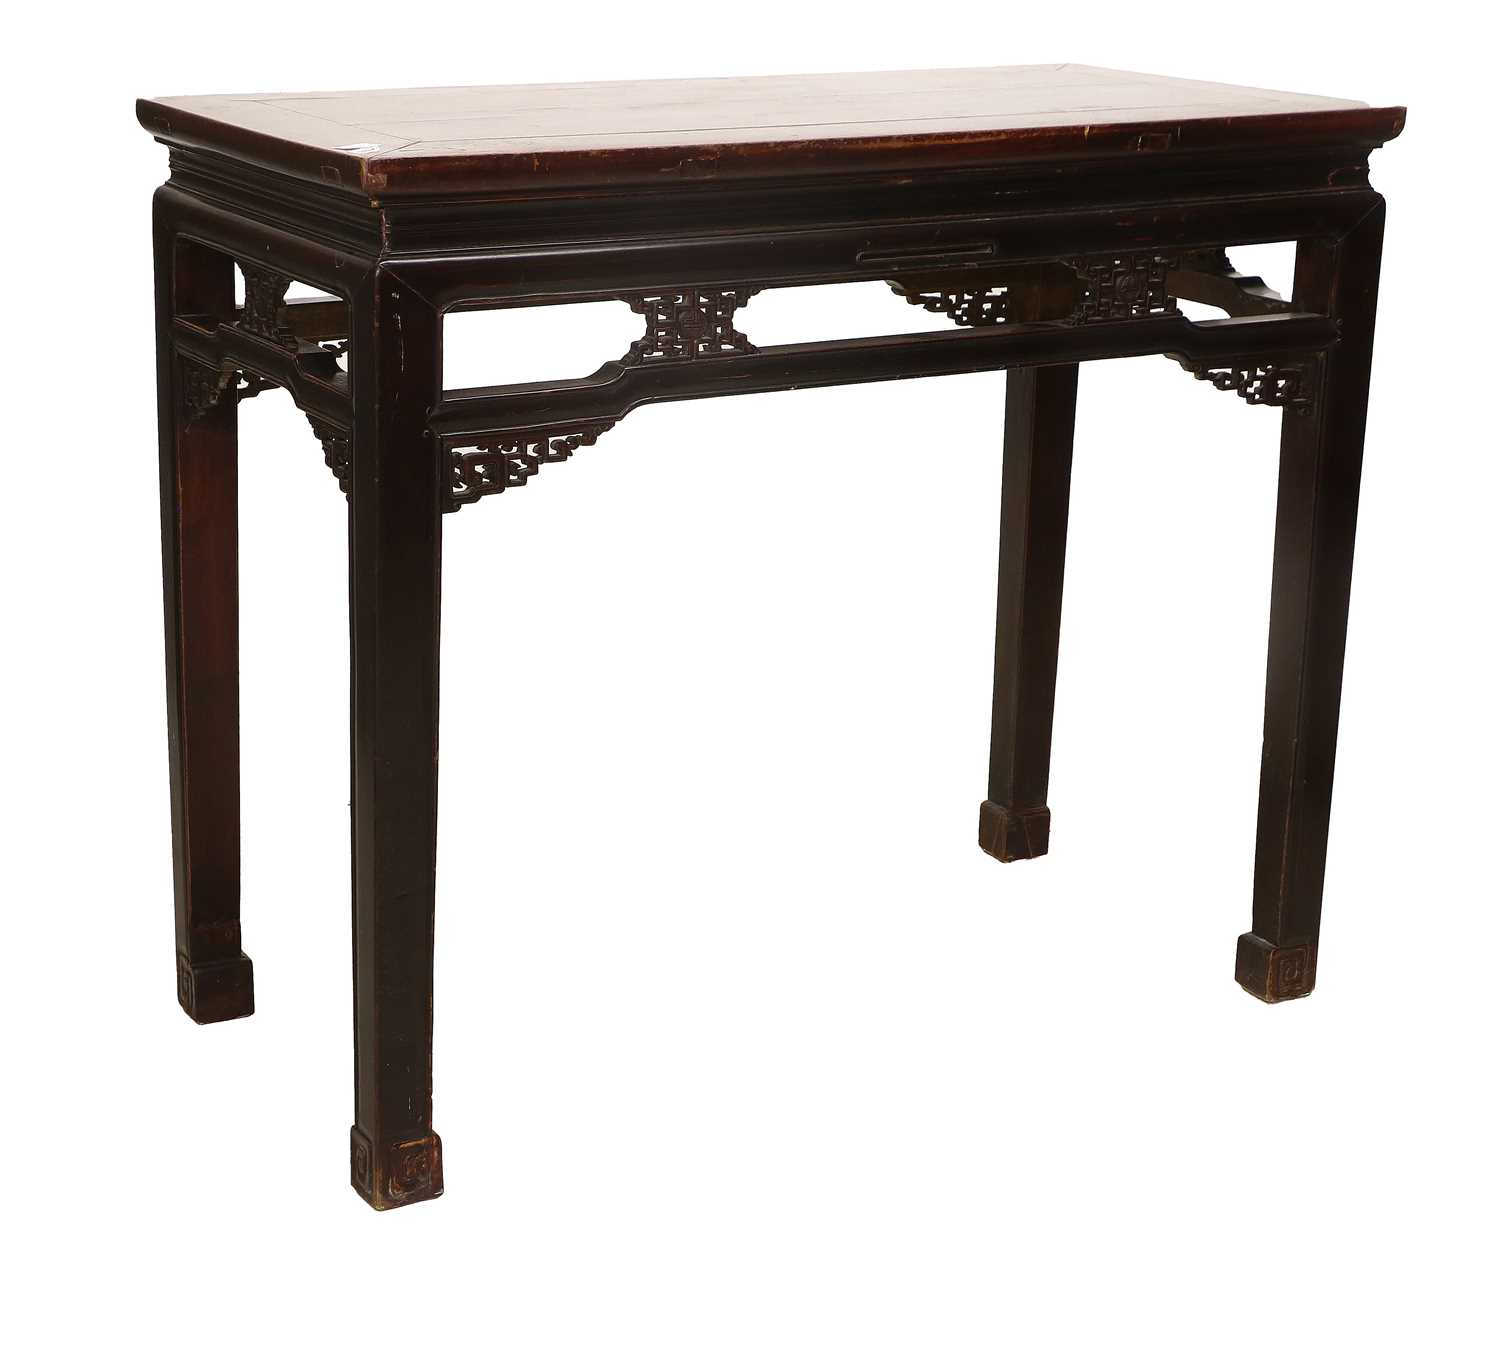 A Late 19th/Early 20th Century Chinese Hardwood Altar Table, the moulded top above humpback